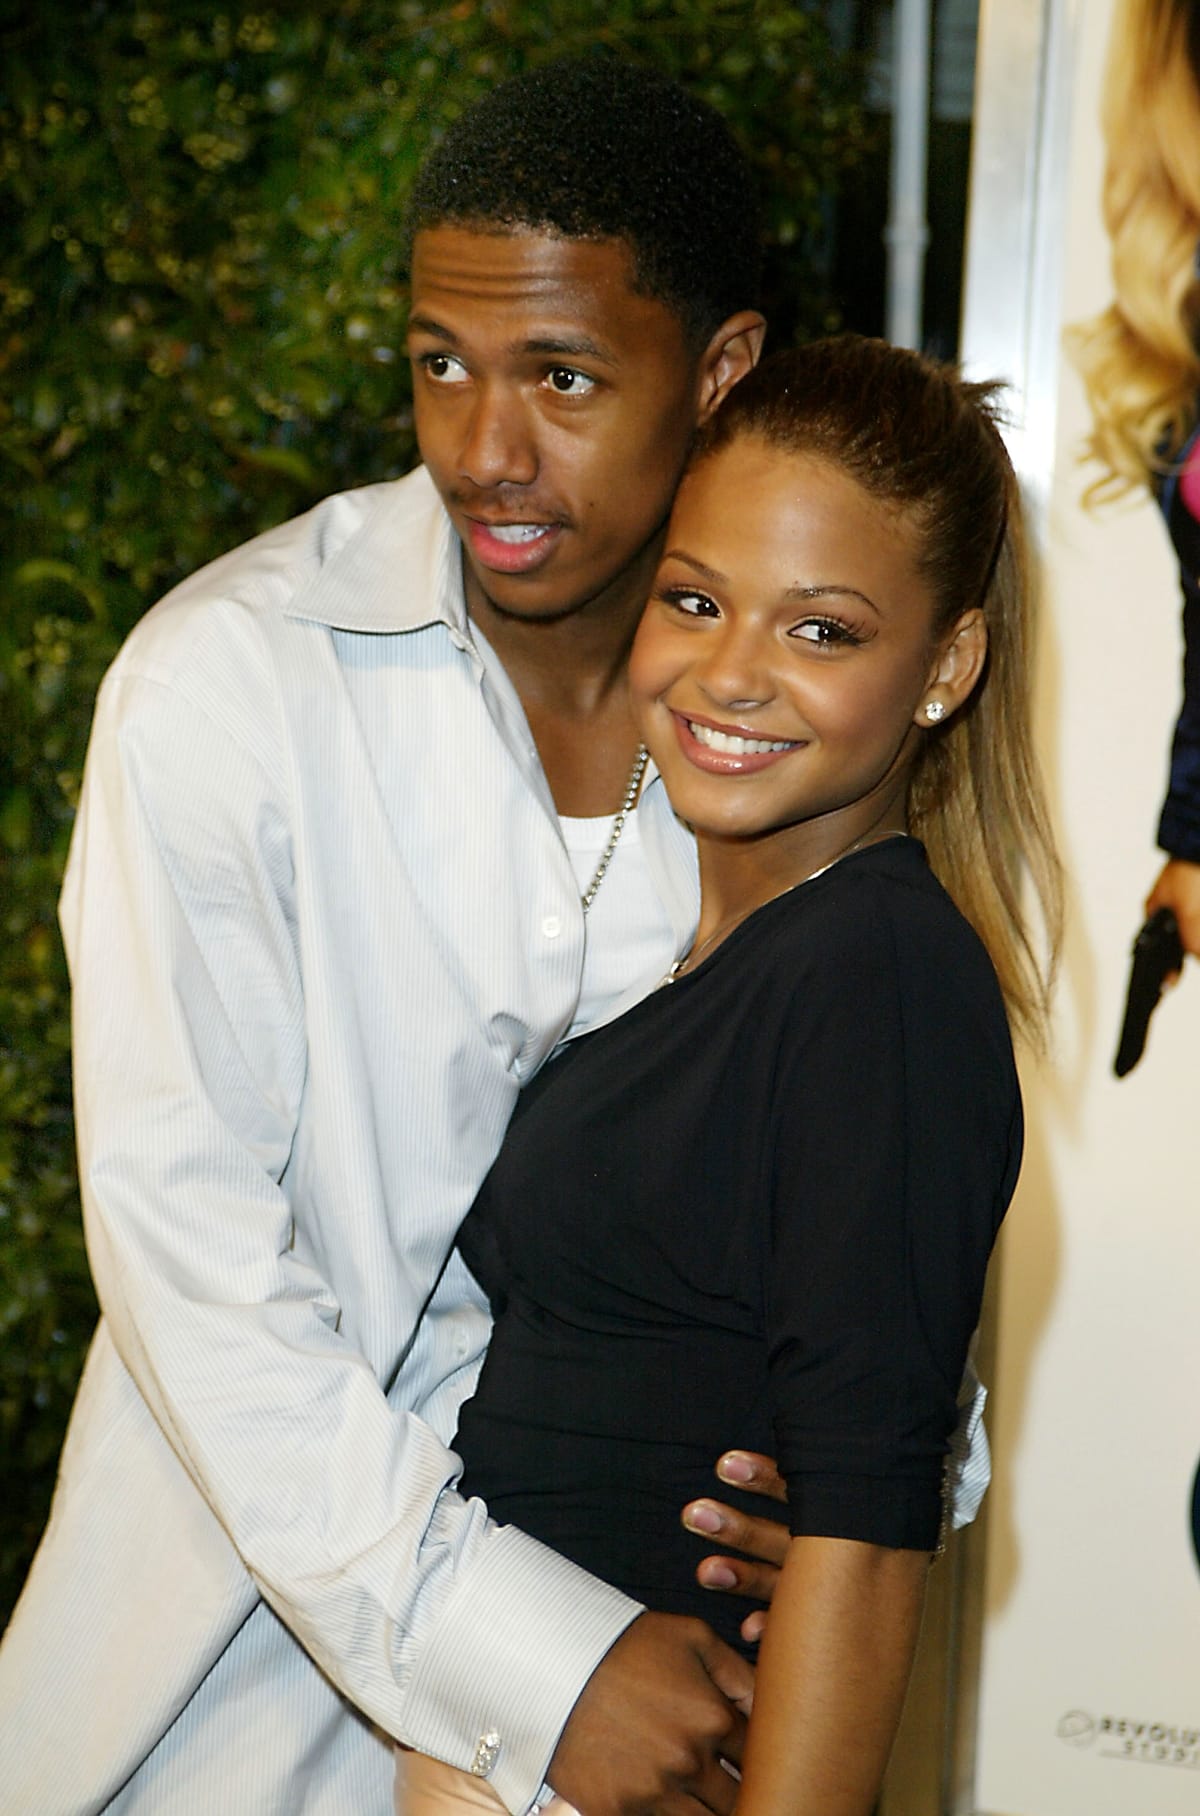 Christina Milian and her boyfriend Nick Cannon at the premiere of the movie White Chicks